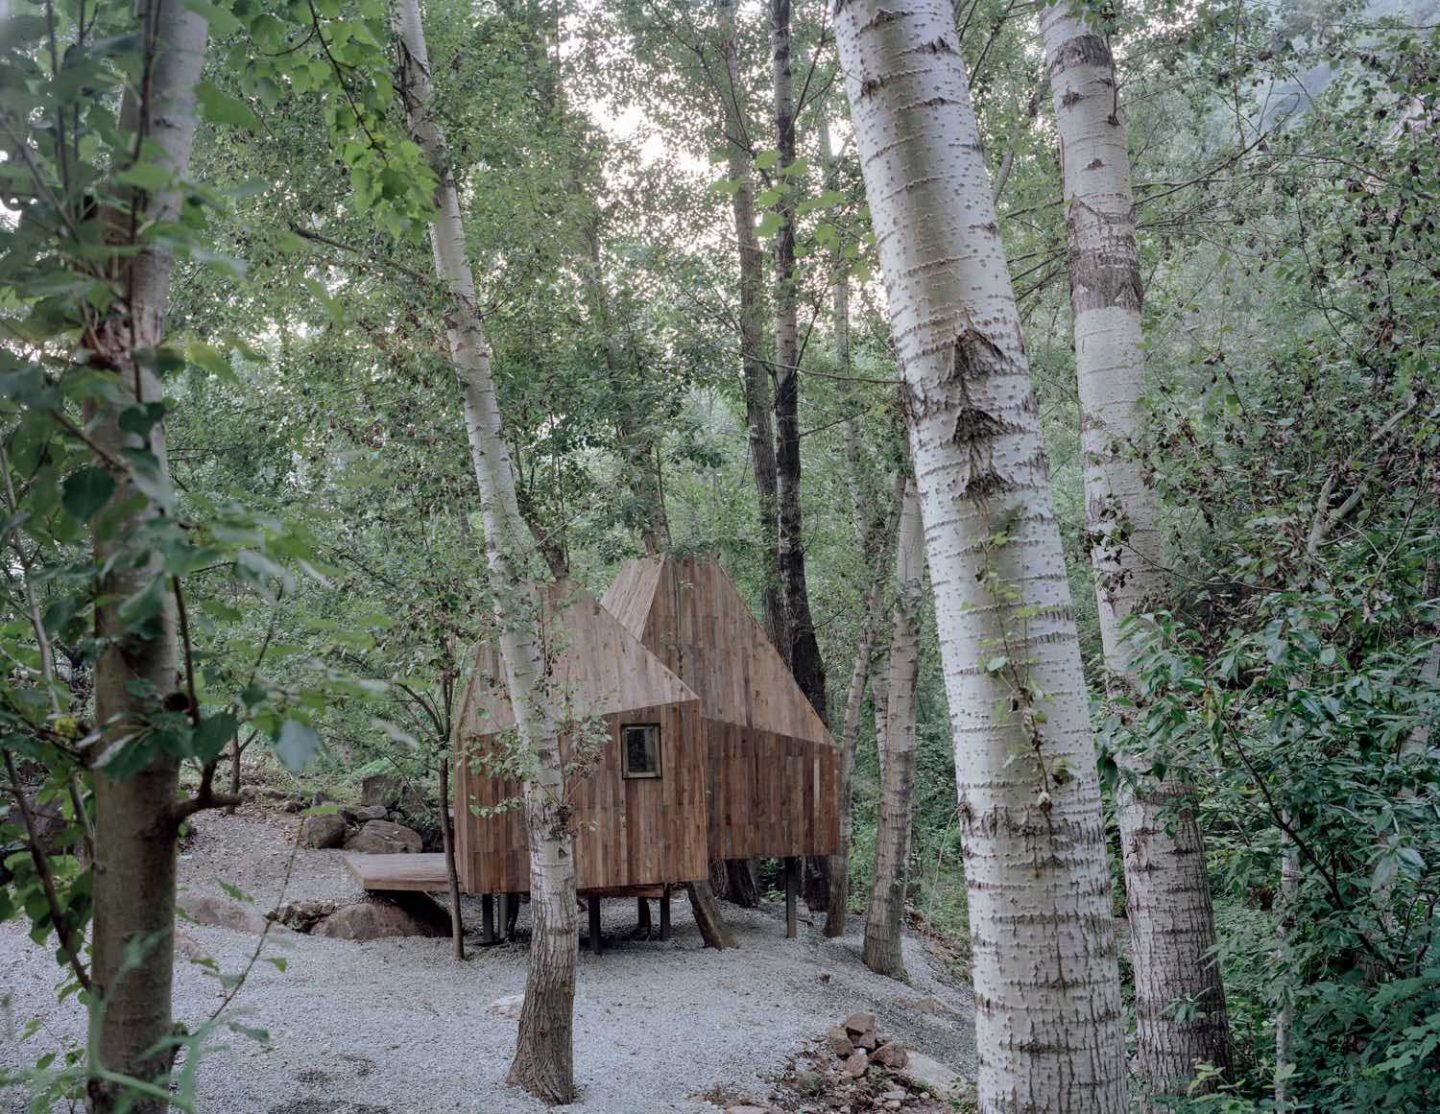 Architecture-Wee-Studio-Treehouse-3